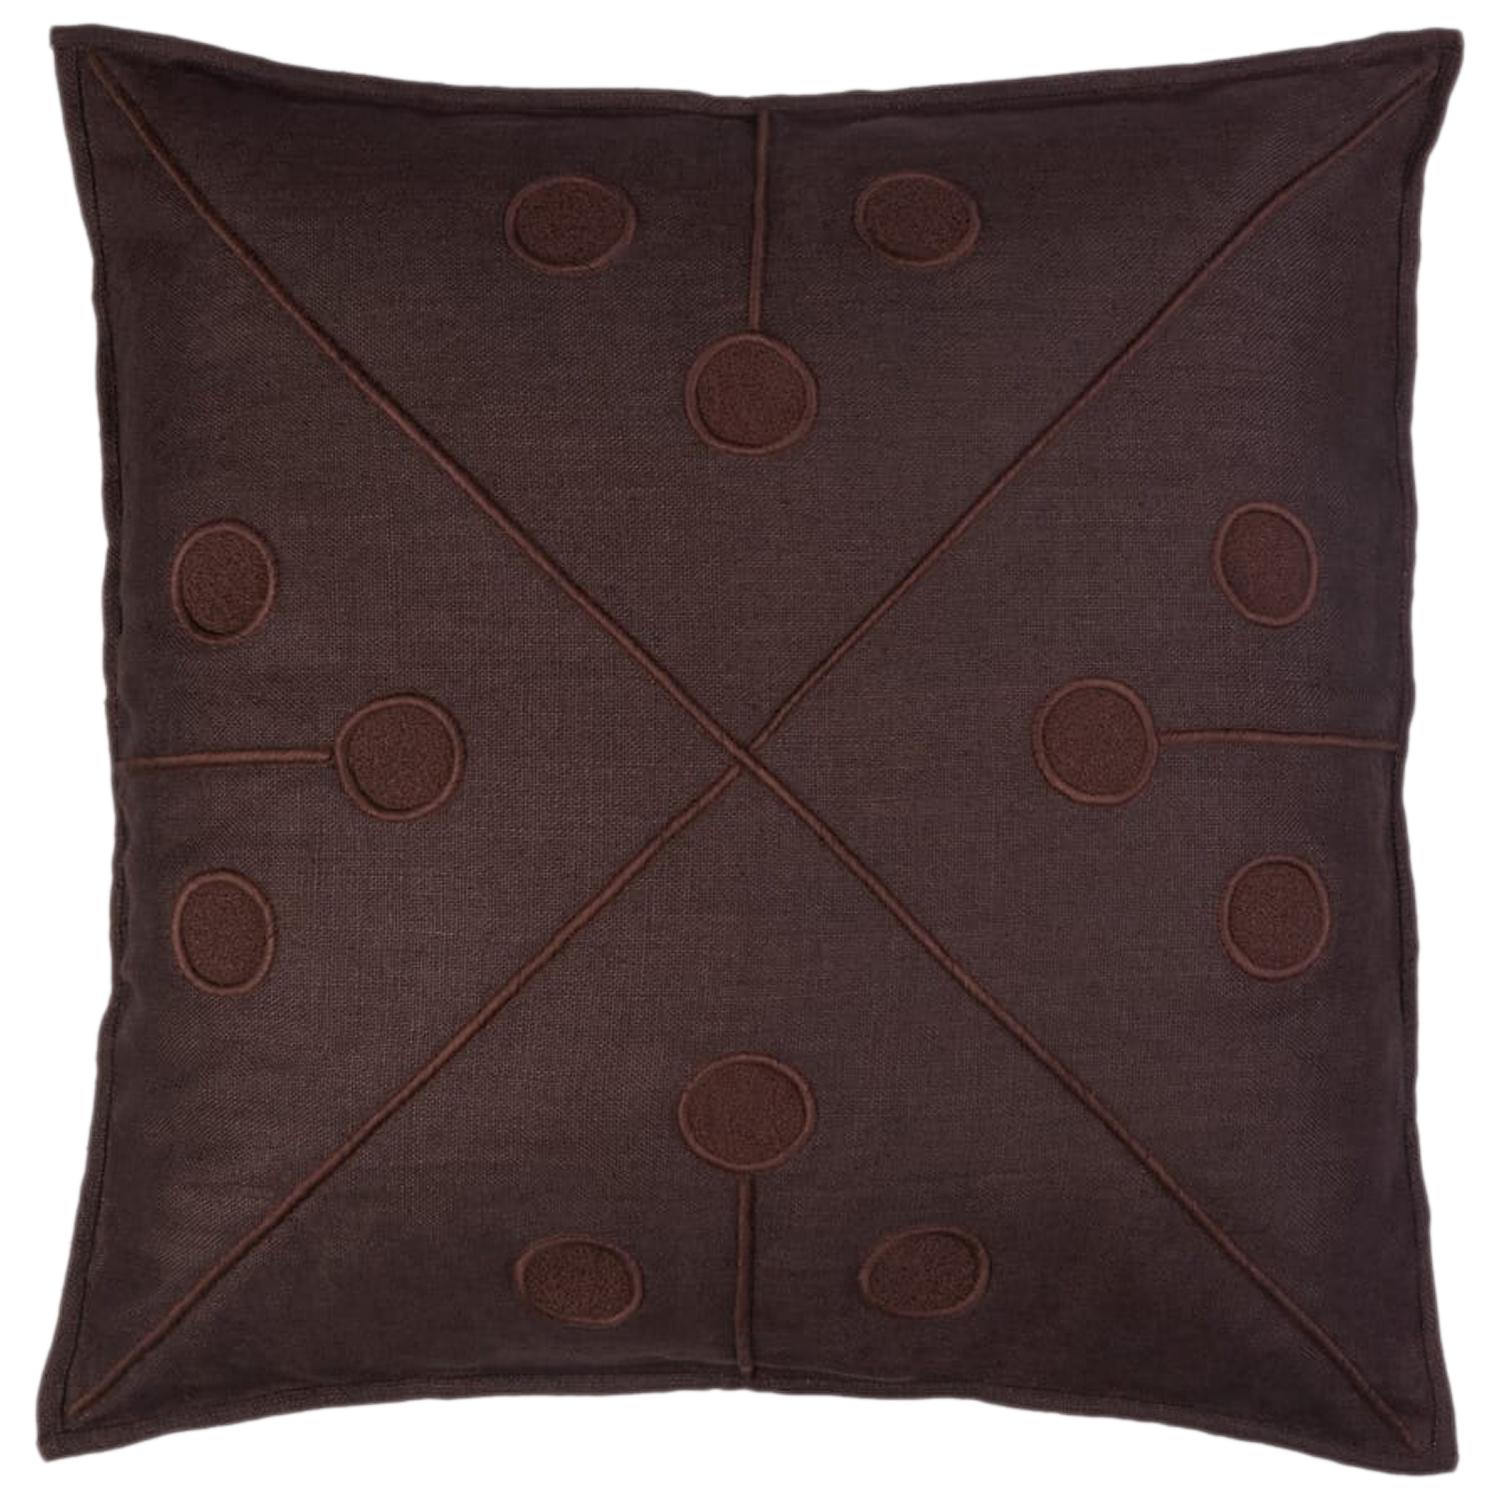 Ukiyo Hand Embroidered Brown Linen Pillow Cover For Sale